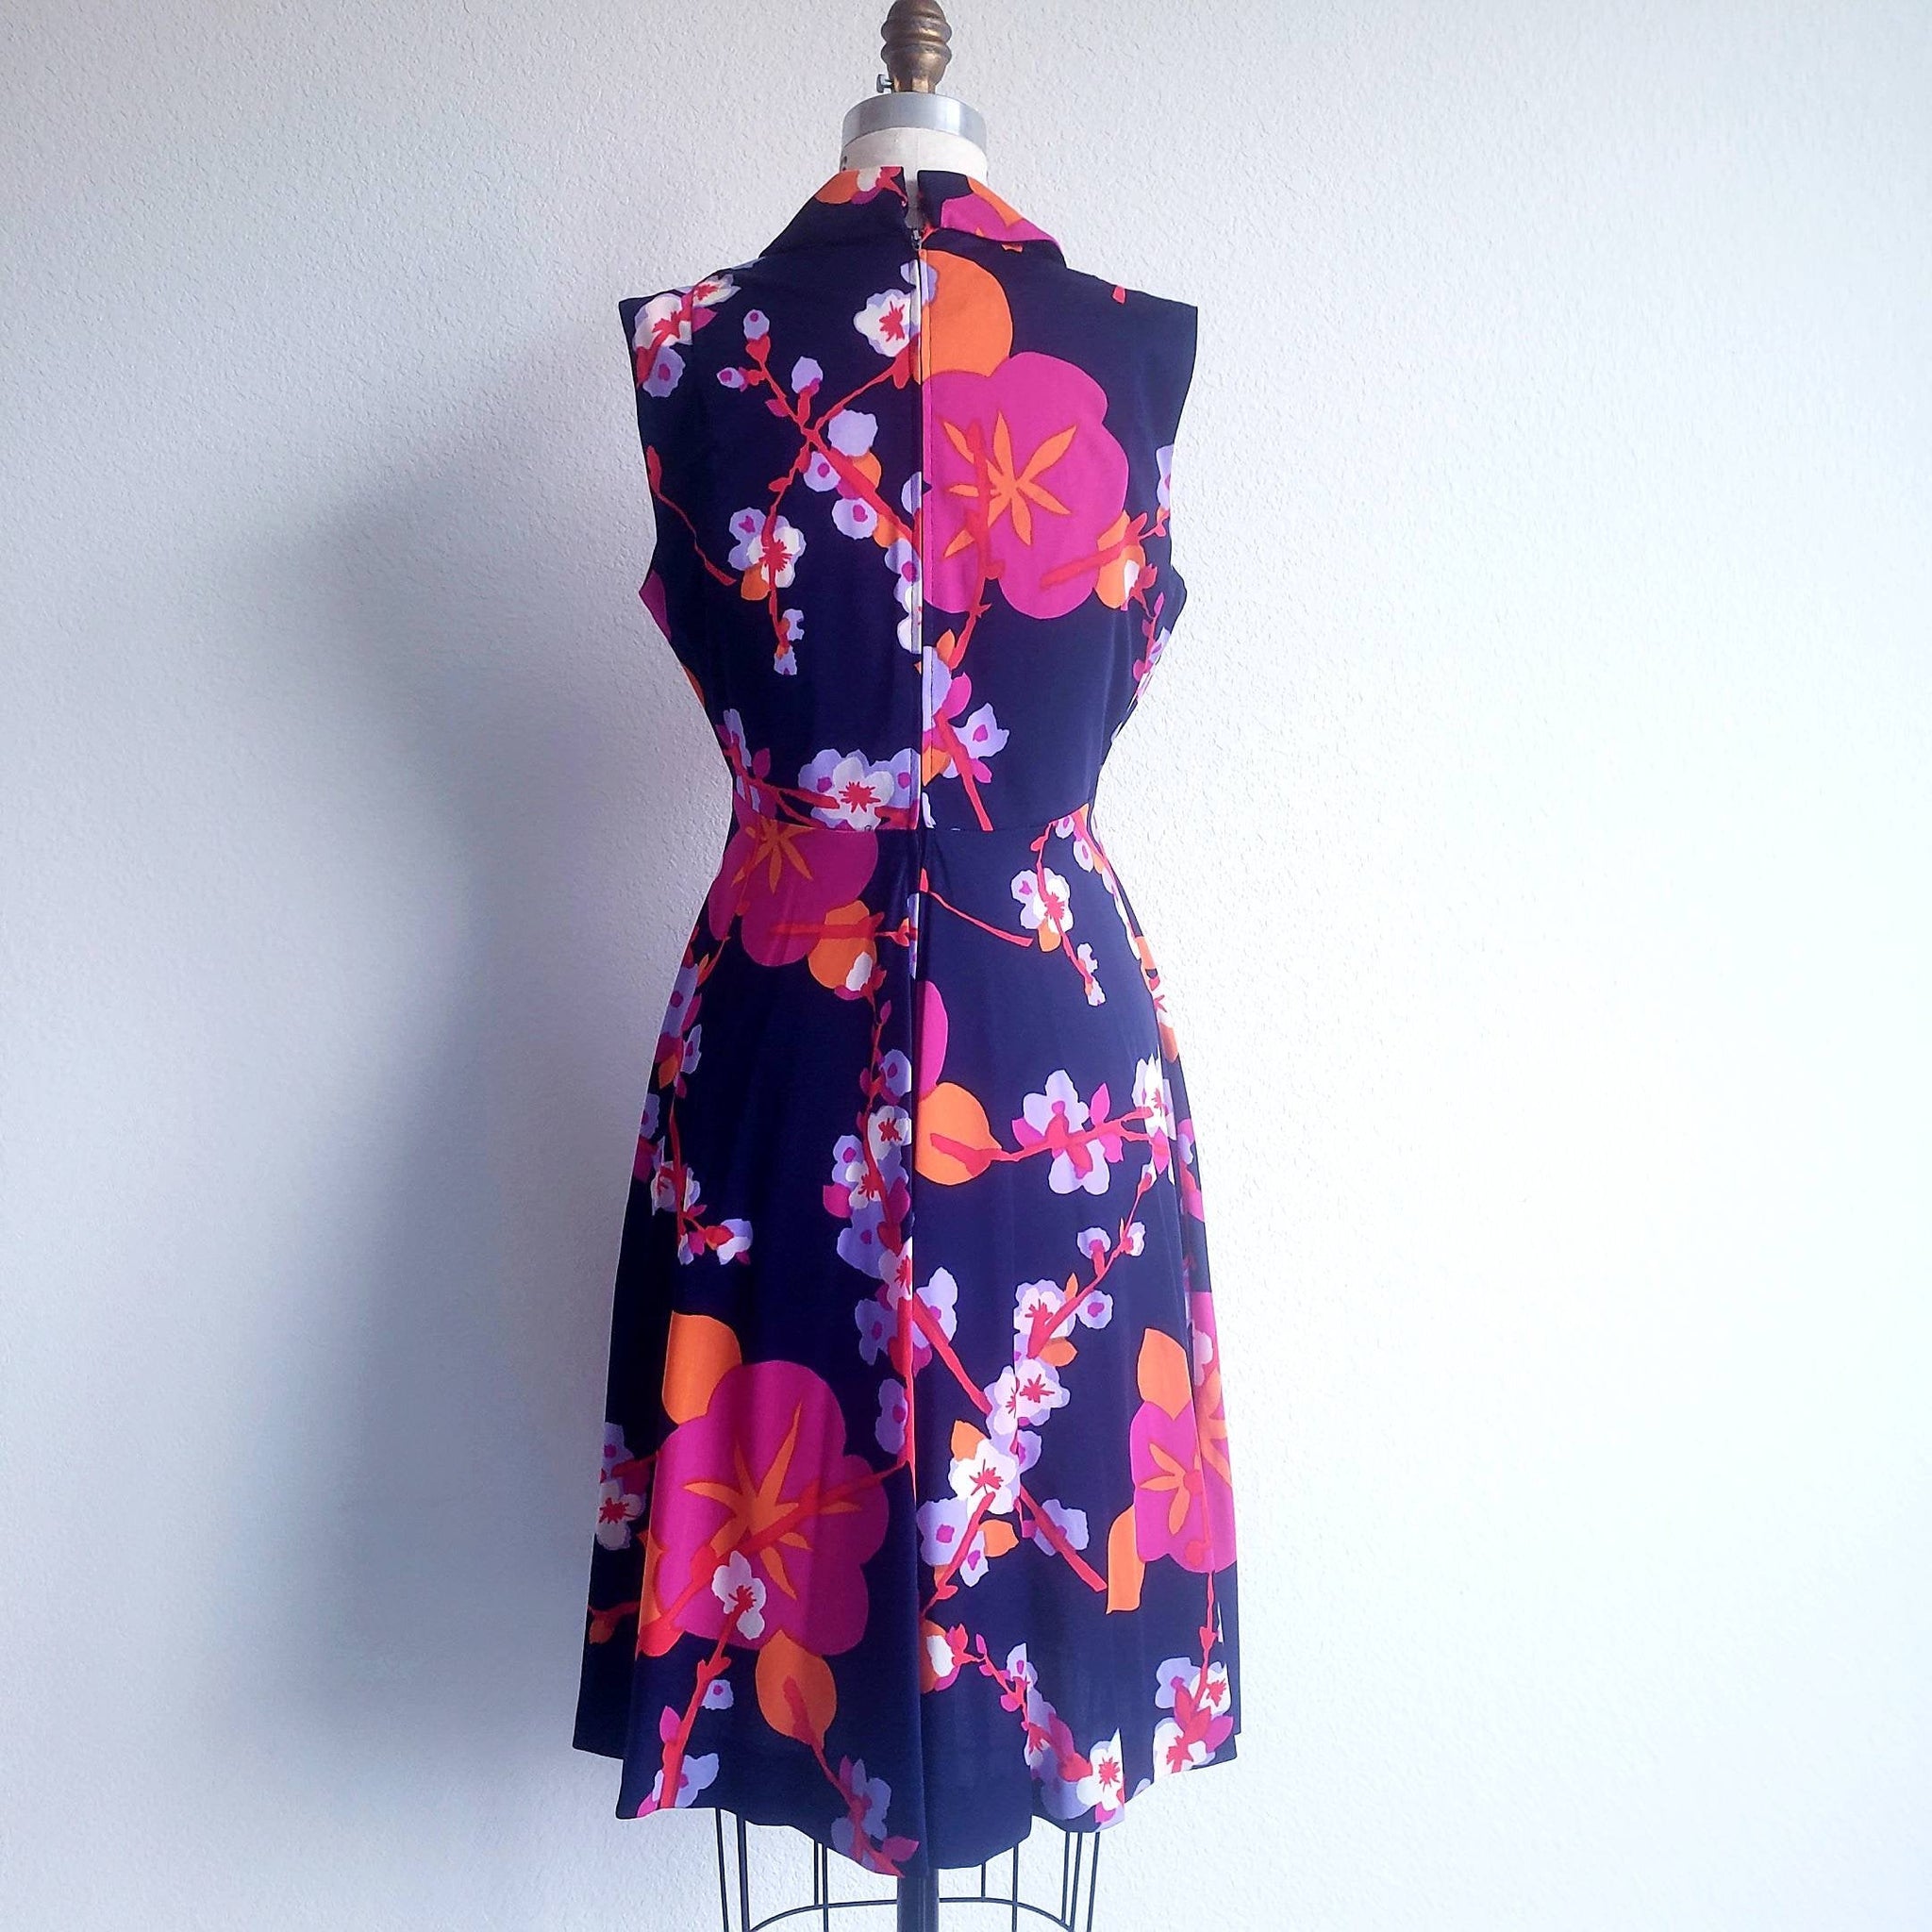 Vintage Midi Floral Lord and Taylor Sleeveless Dress - ChicCityVintage